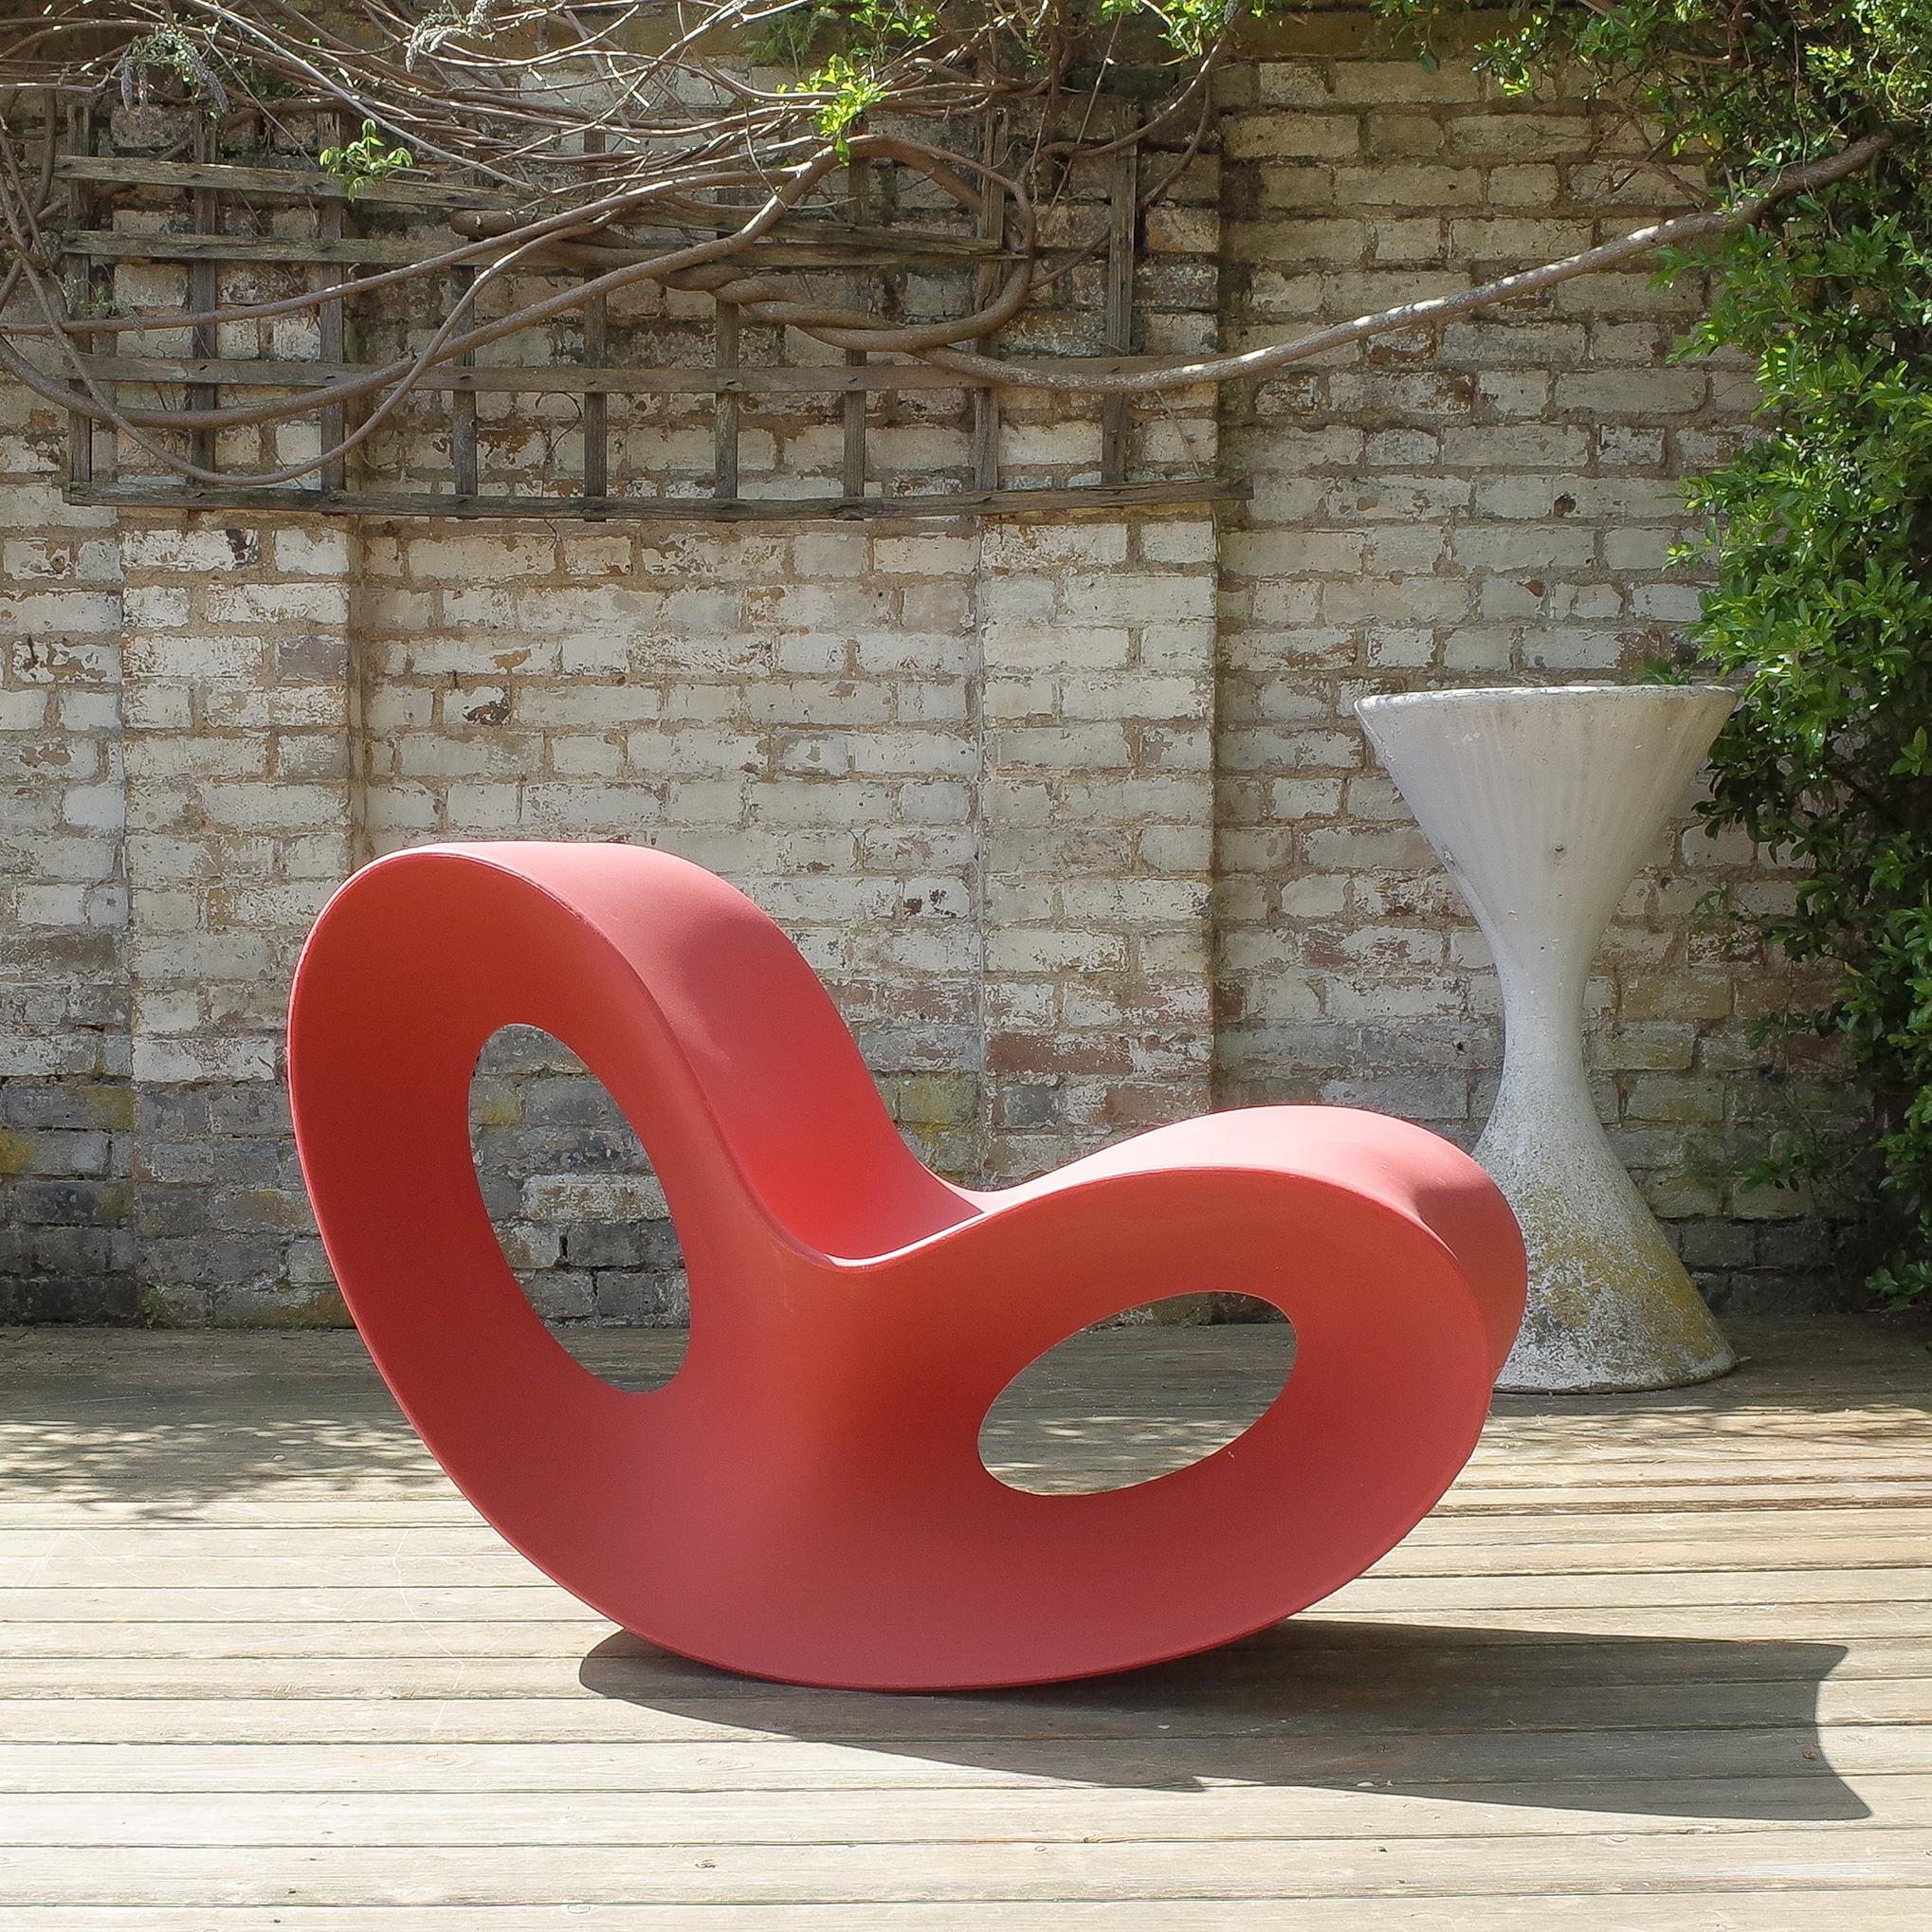 Matte Red Voido chair designed by Ron Arad for Magis in rotational-moulded polyethylene. An early example 2006-2008. Small signs of wear. This matte version is suitable for both indoor and outside use. Fabulous instant garden sculpture.